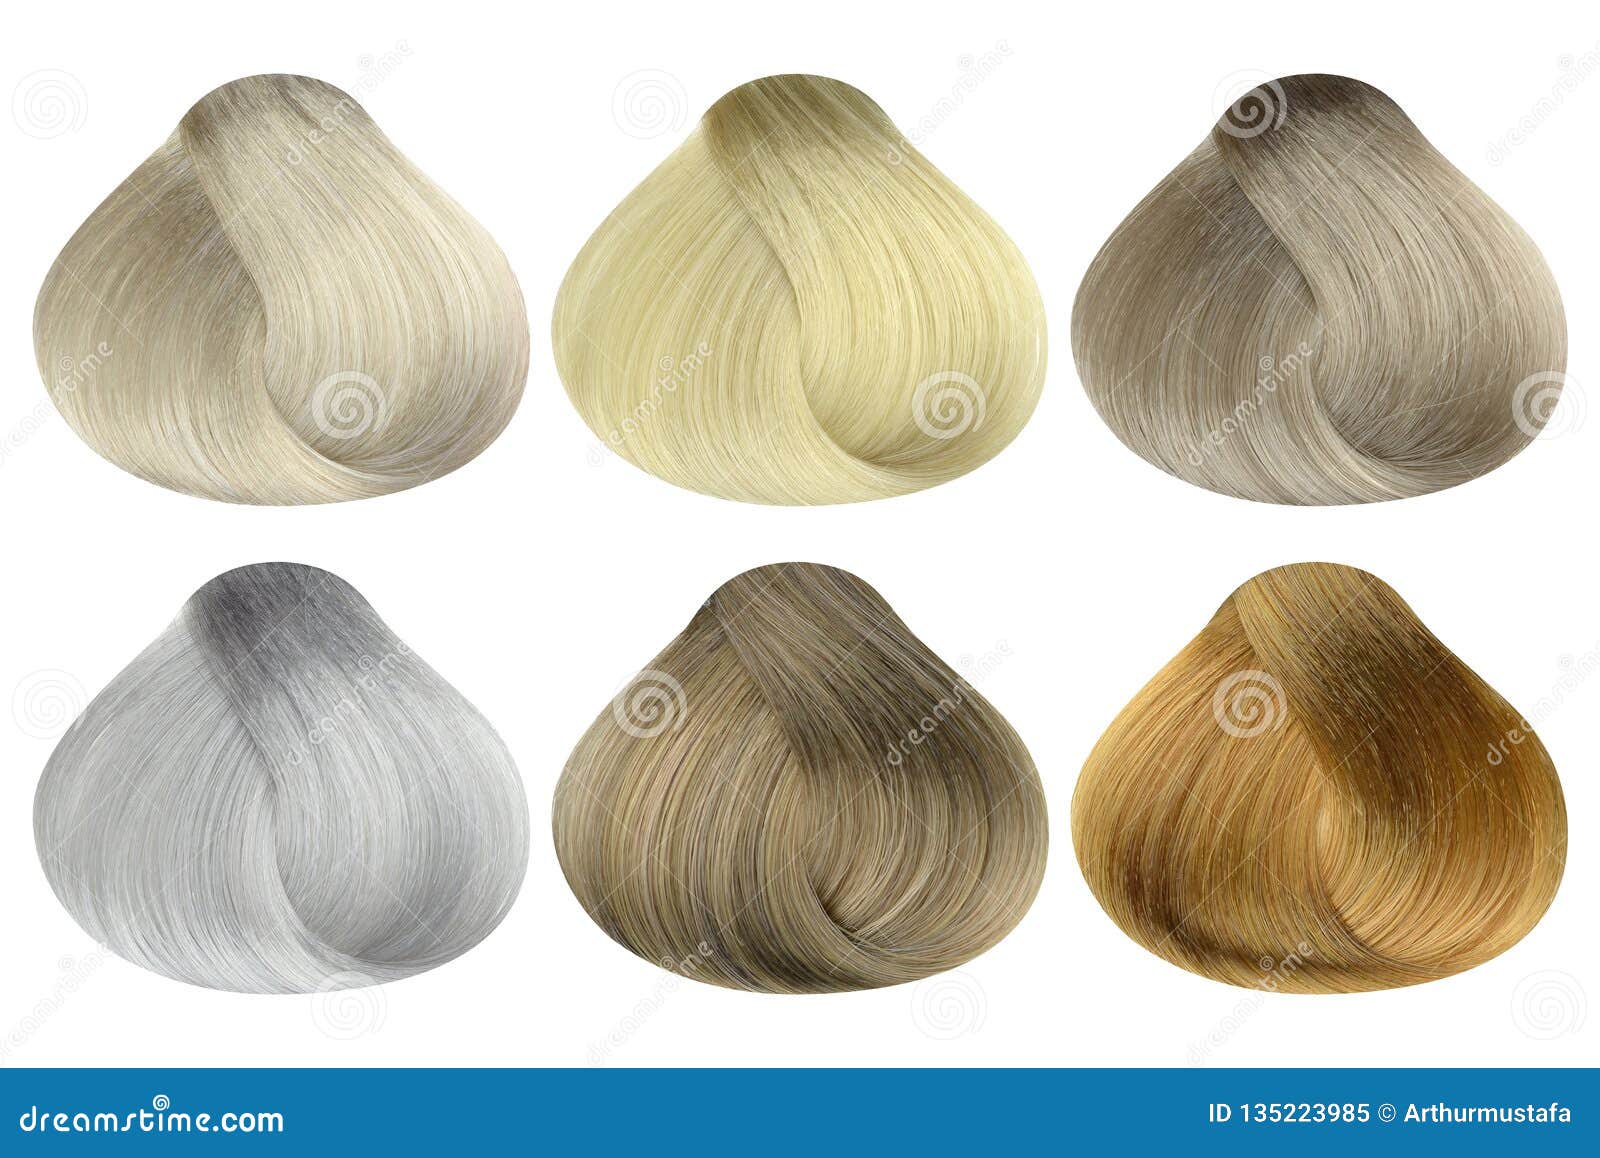 Set Of Locks Of Six Different Blonde Hair Color Samples X28